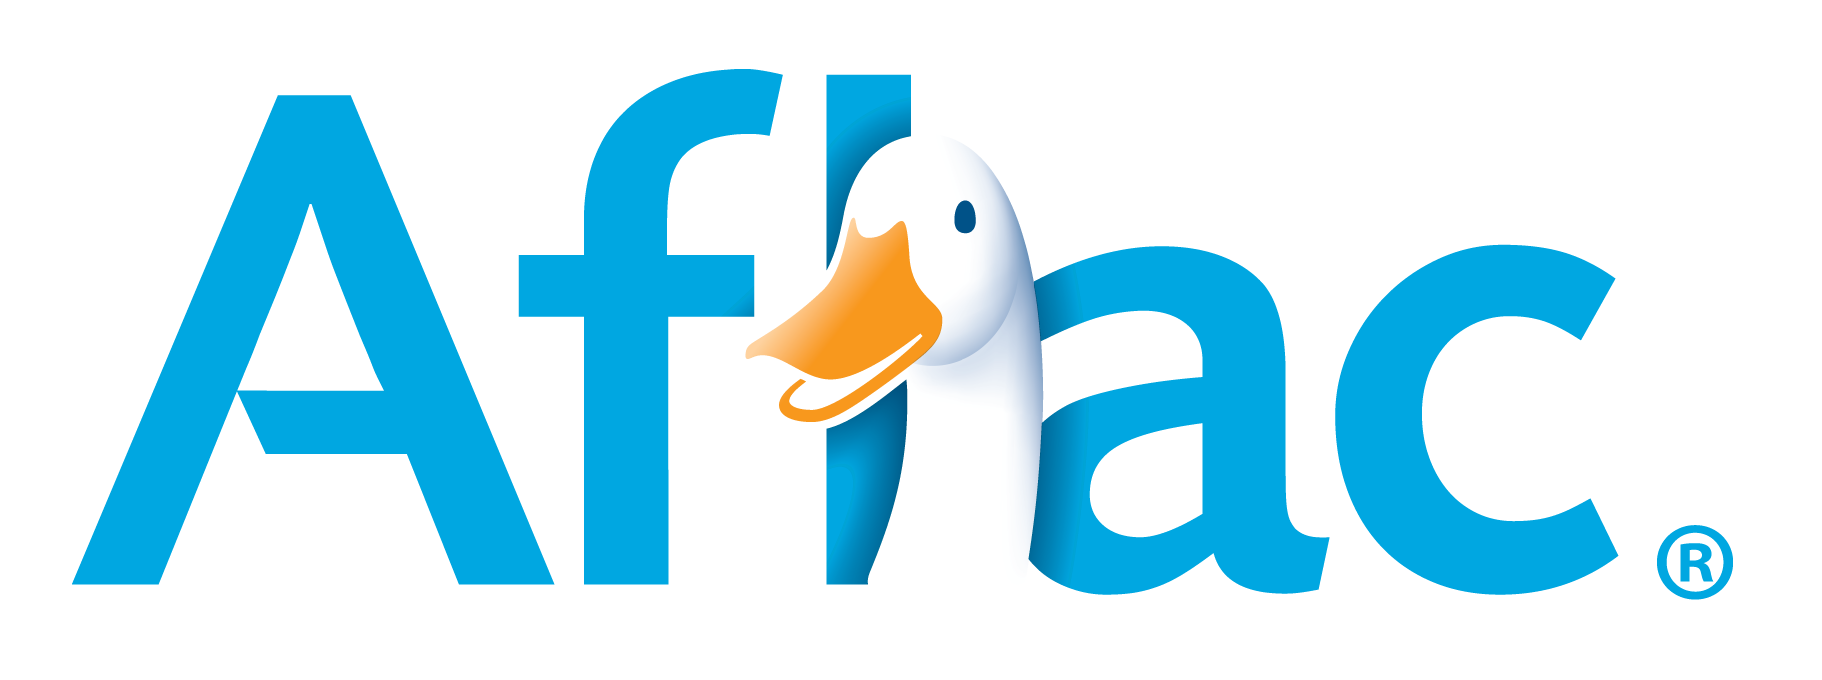 Aflac Final Epense